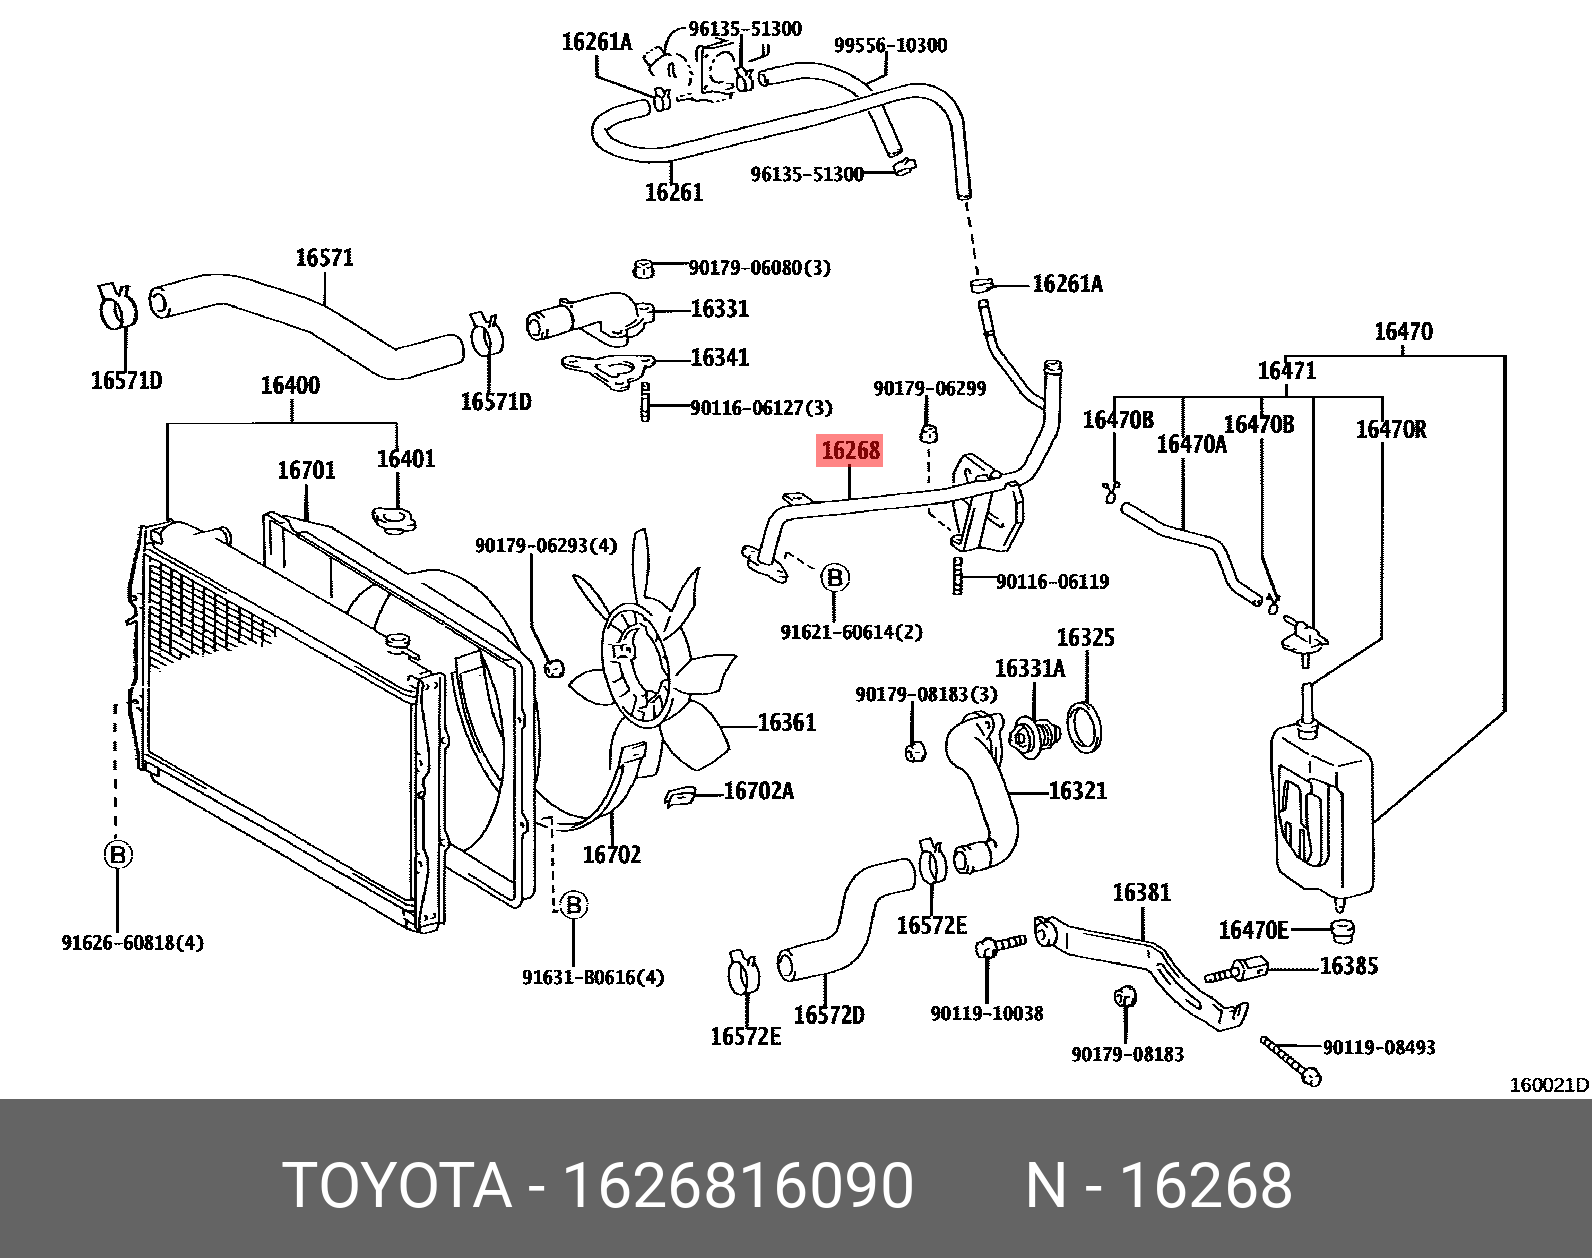 COROLLA LEVIN 198705 - 199106, PIPE, WATER BY-PASS, NO.1